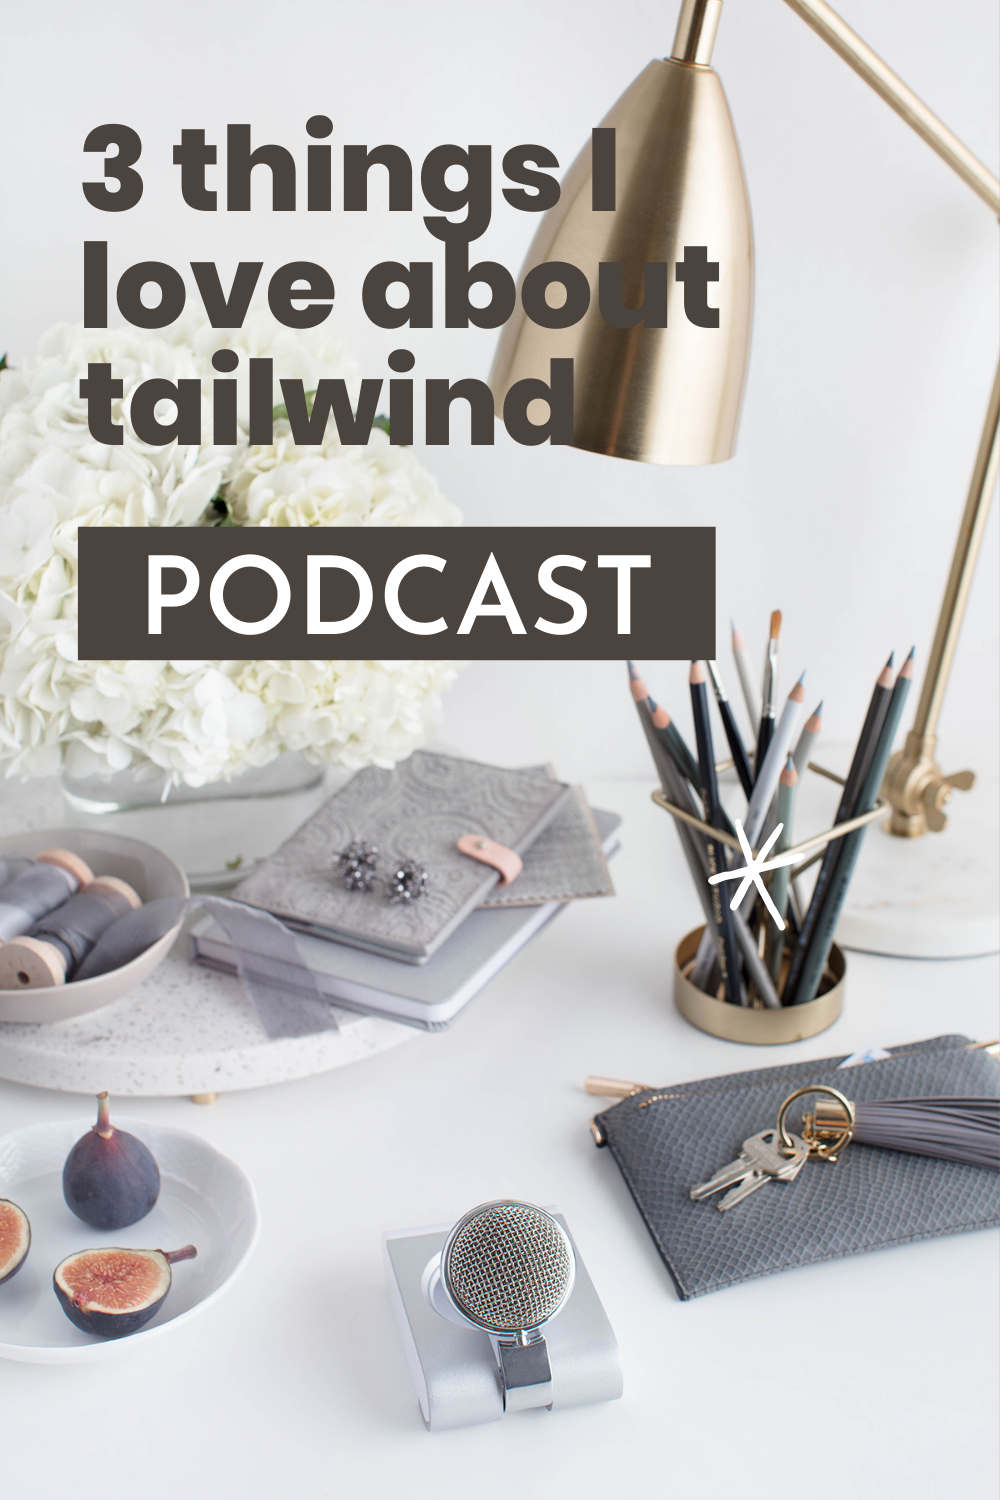 3 things I love about tailwind